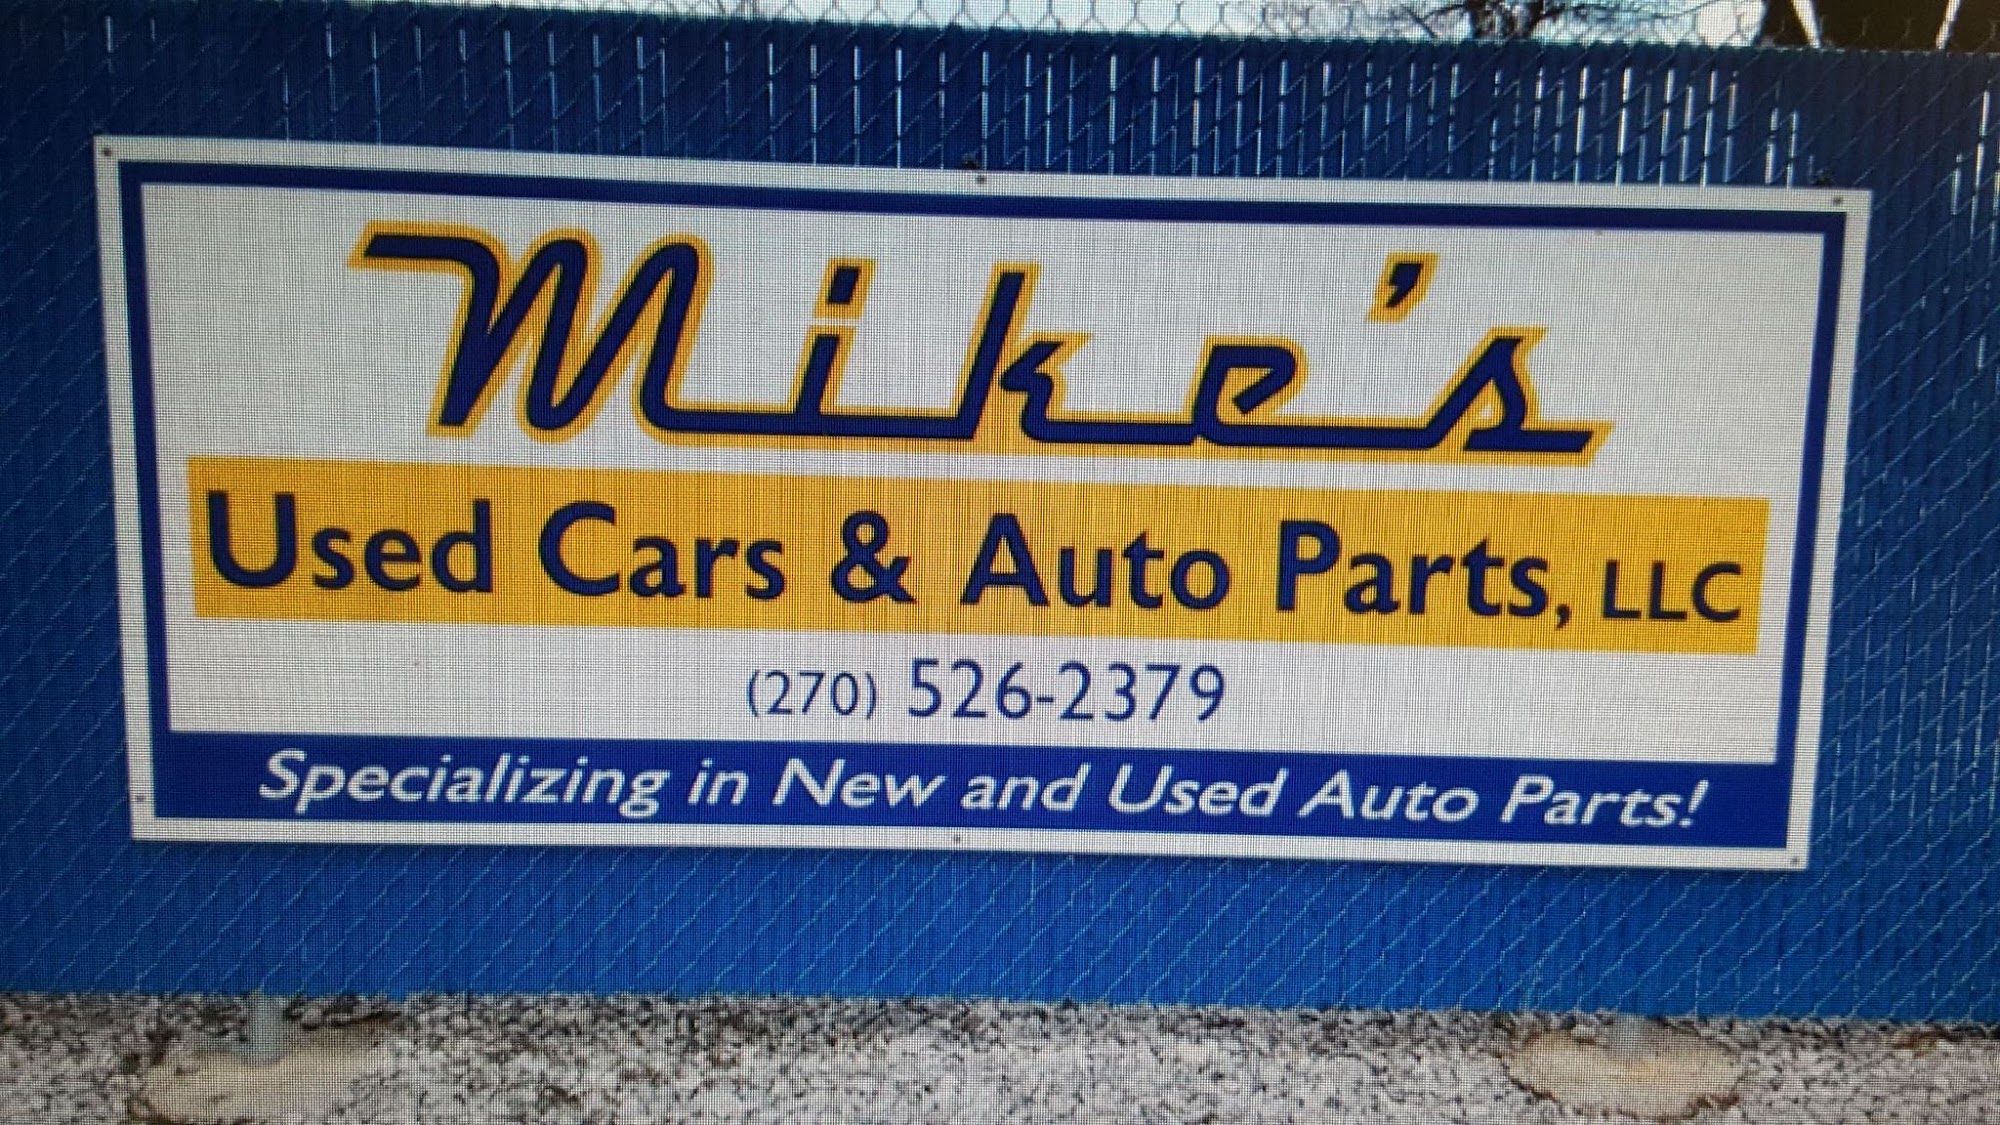 Mike's Used Cars & Auto Parts, LLC